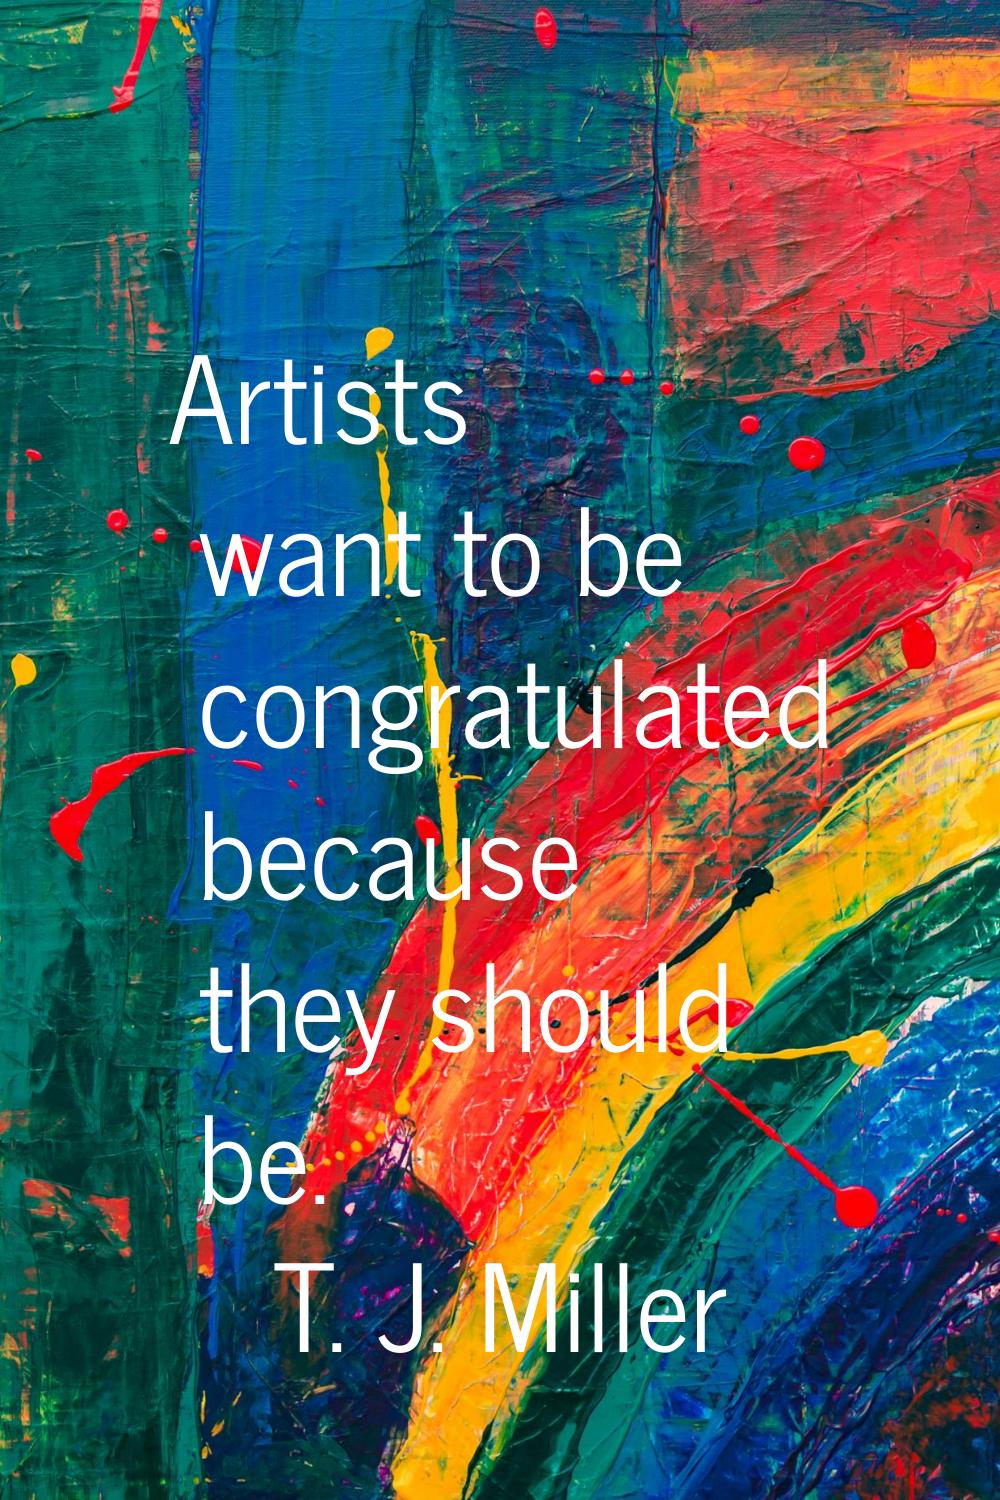 Artists want to be congratulated because they should be.